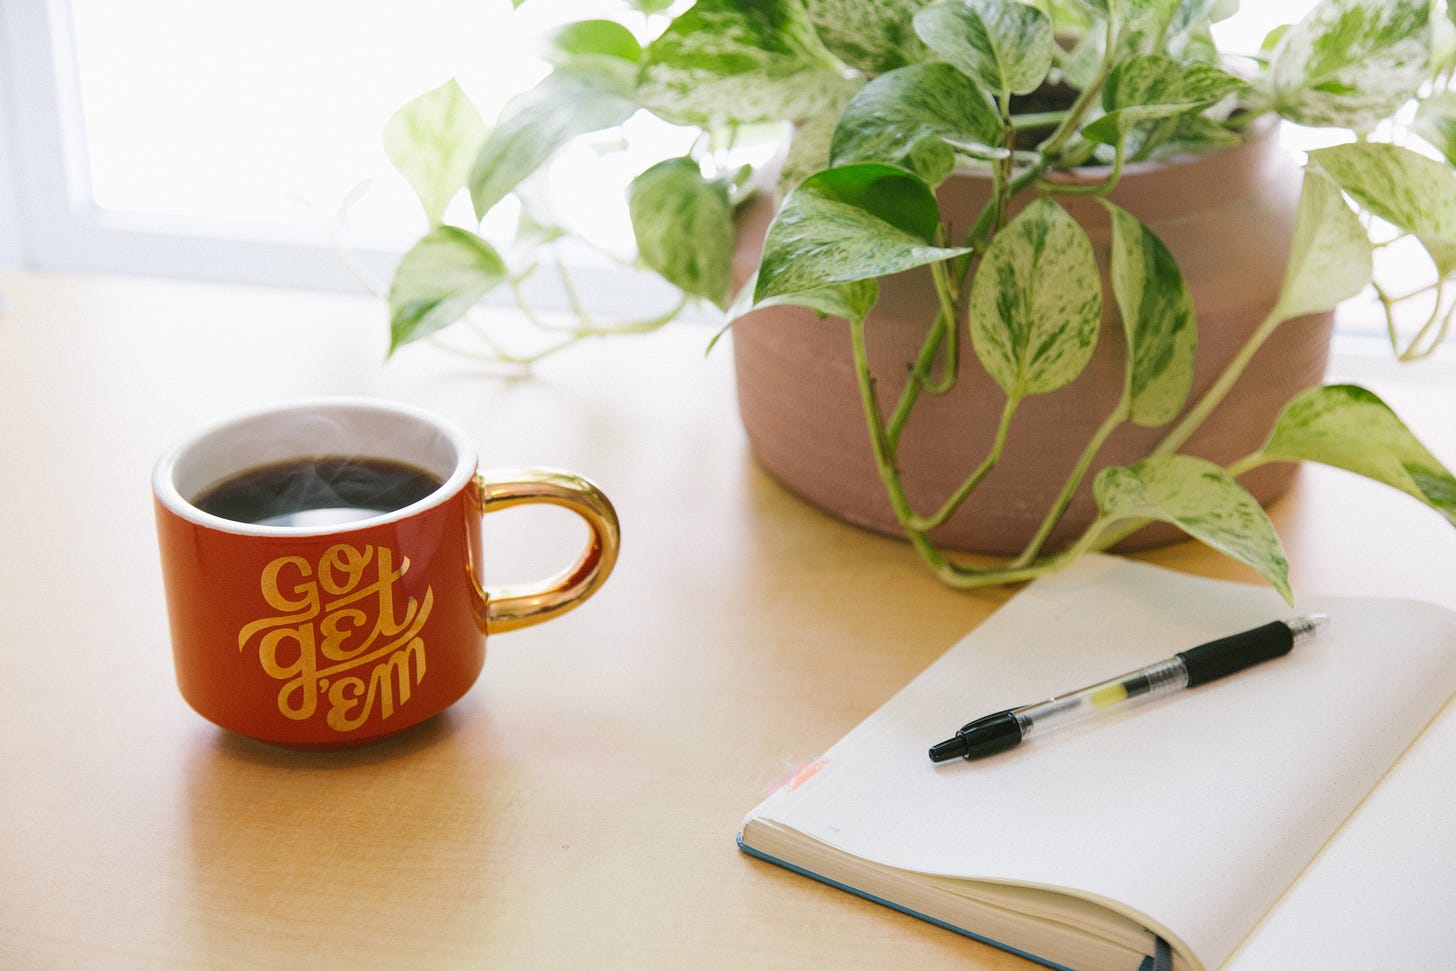 Sun streams through a window onto a tabletop. On the tabletop: a mug of coffee that bears a message of "Go Get 'Em," a healthy green potted plan plant, and an open journal with pen.